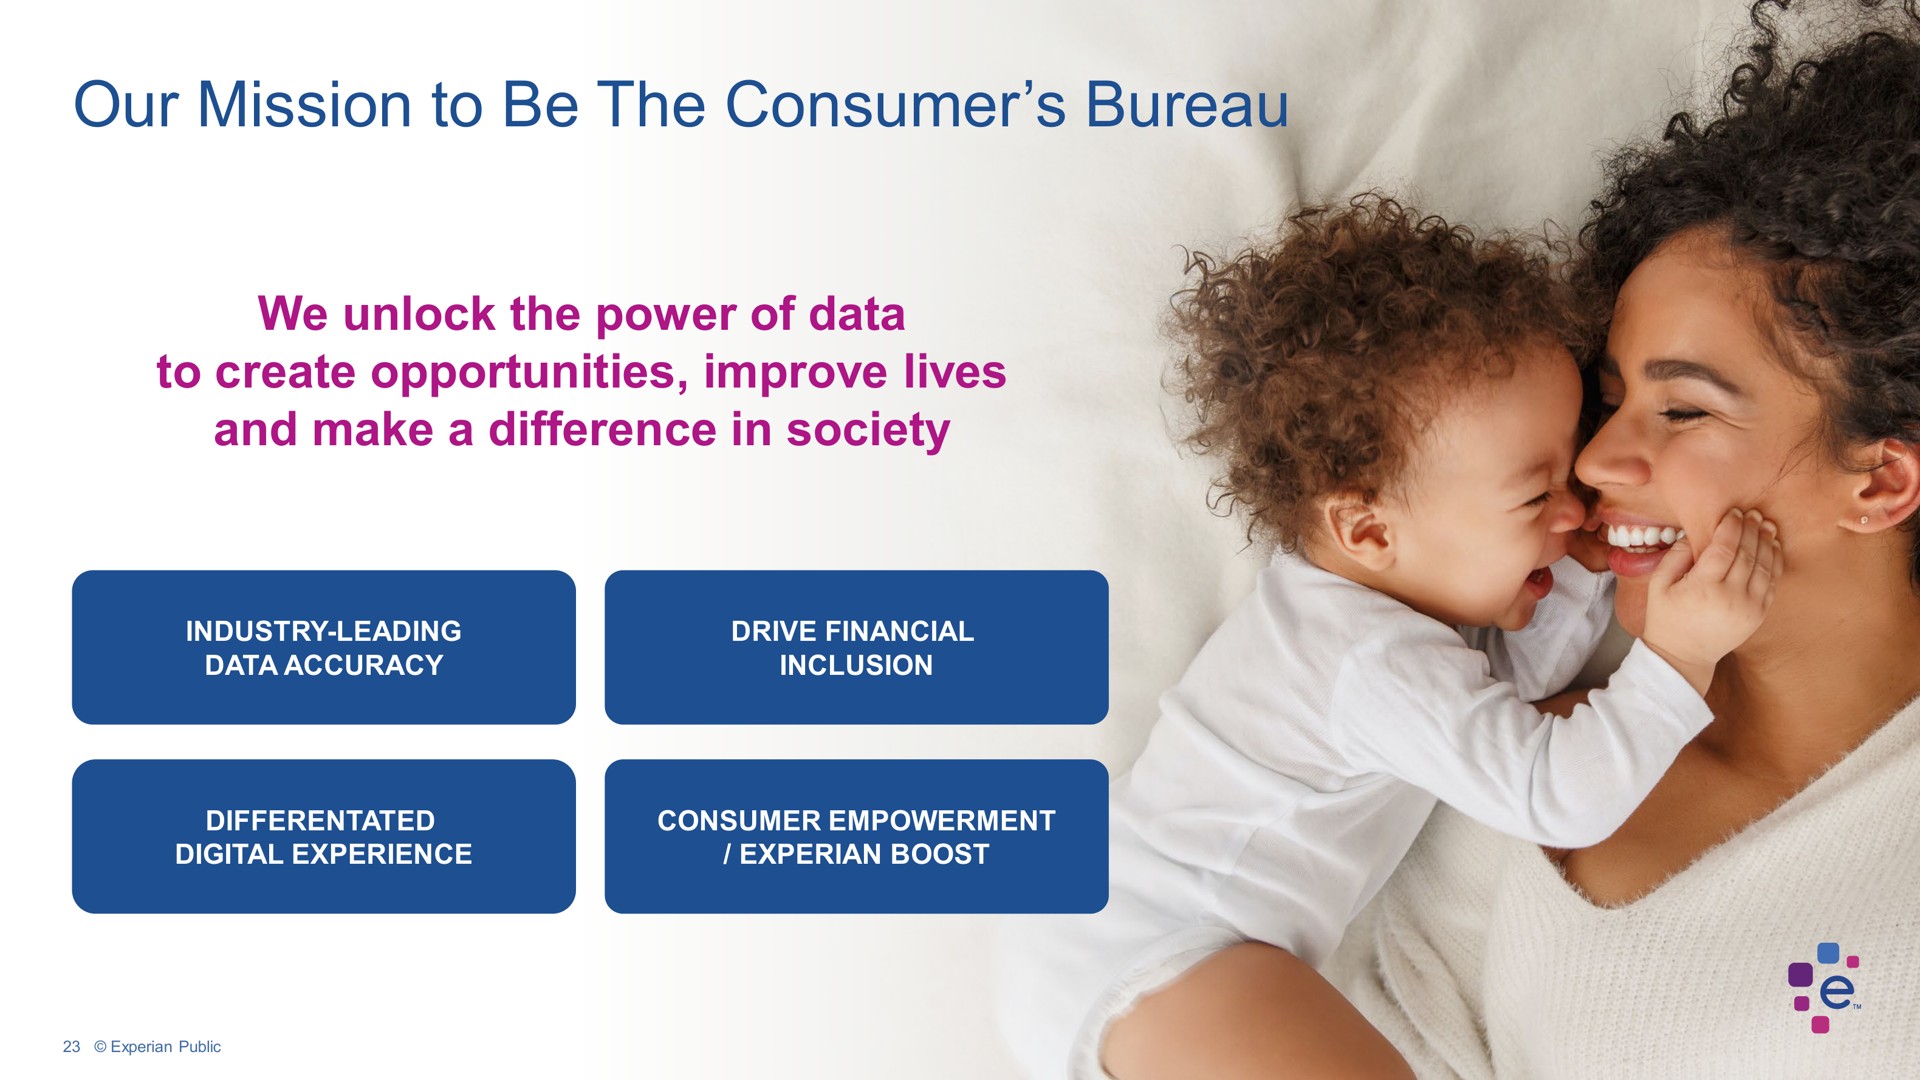 our mission to be the consumer bureau we unlock the power of data to create opportunities improve lives and make a difference in society | Experian